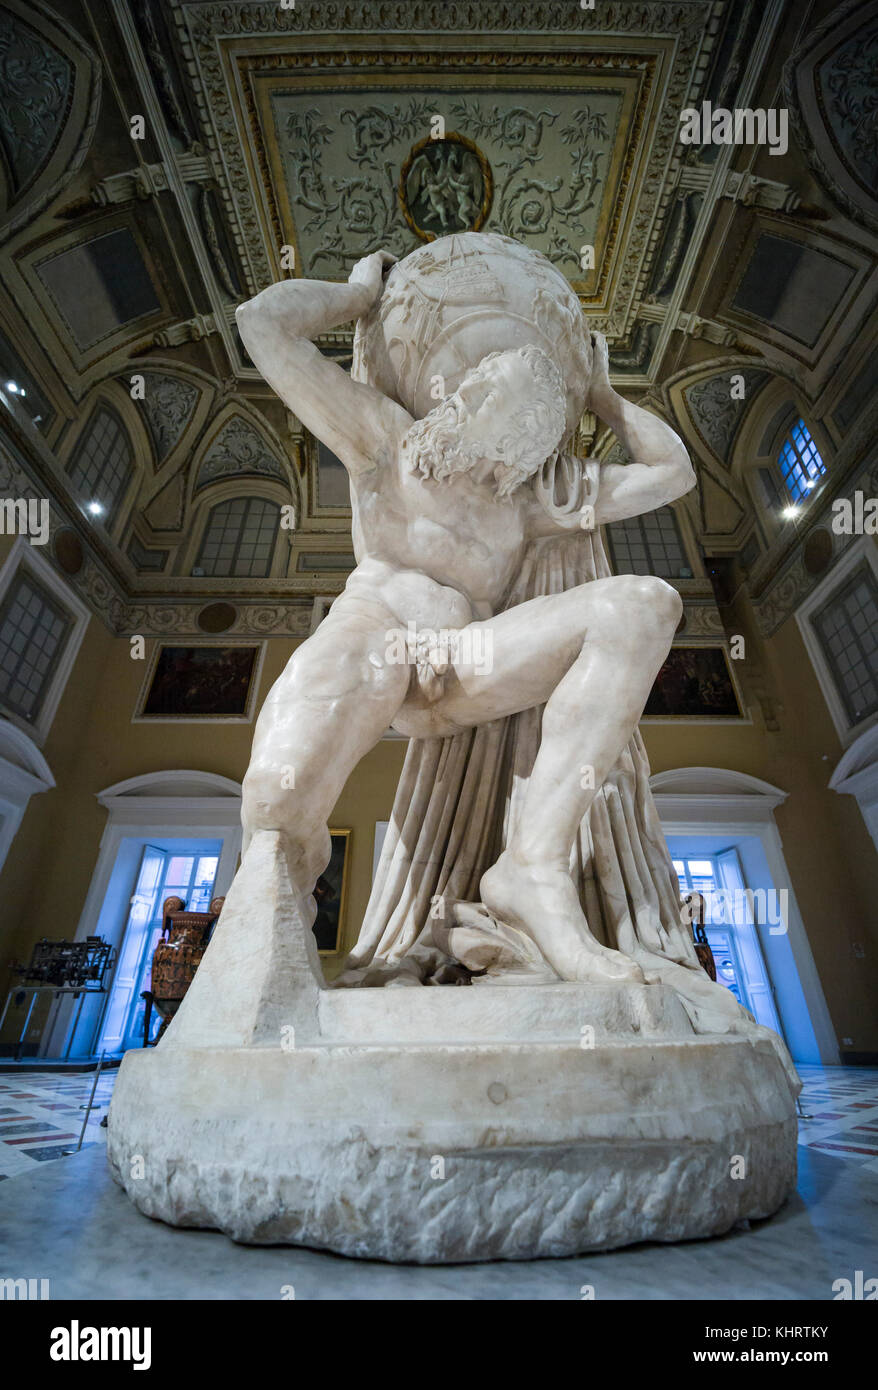 Naples. Italy. Atlas Farnese sculpture, 2nd century A.D. Museo Archeologico Nazionale di Napoli. Naples National Archaeological Museum. Stock Photo